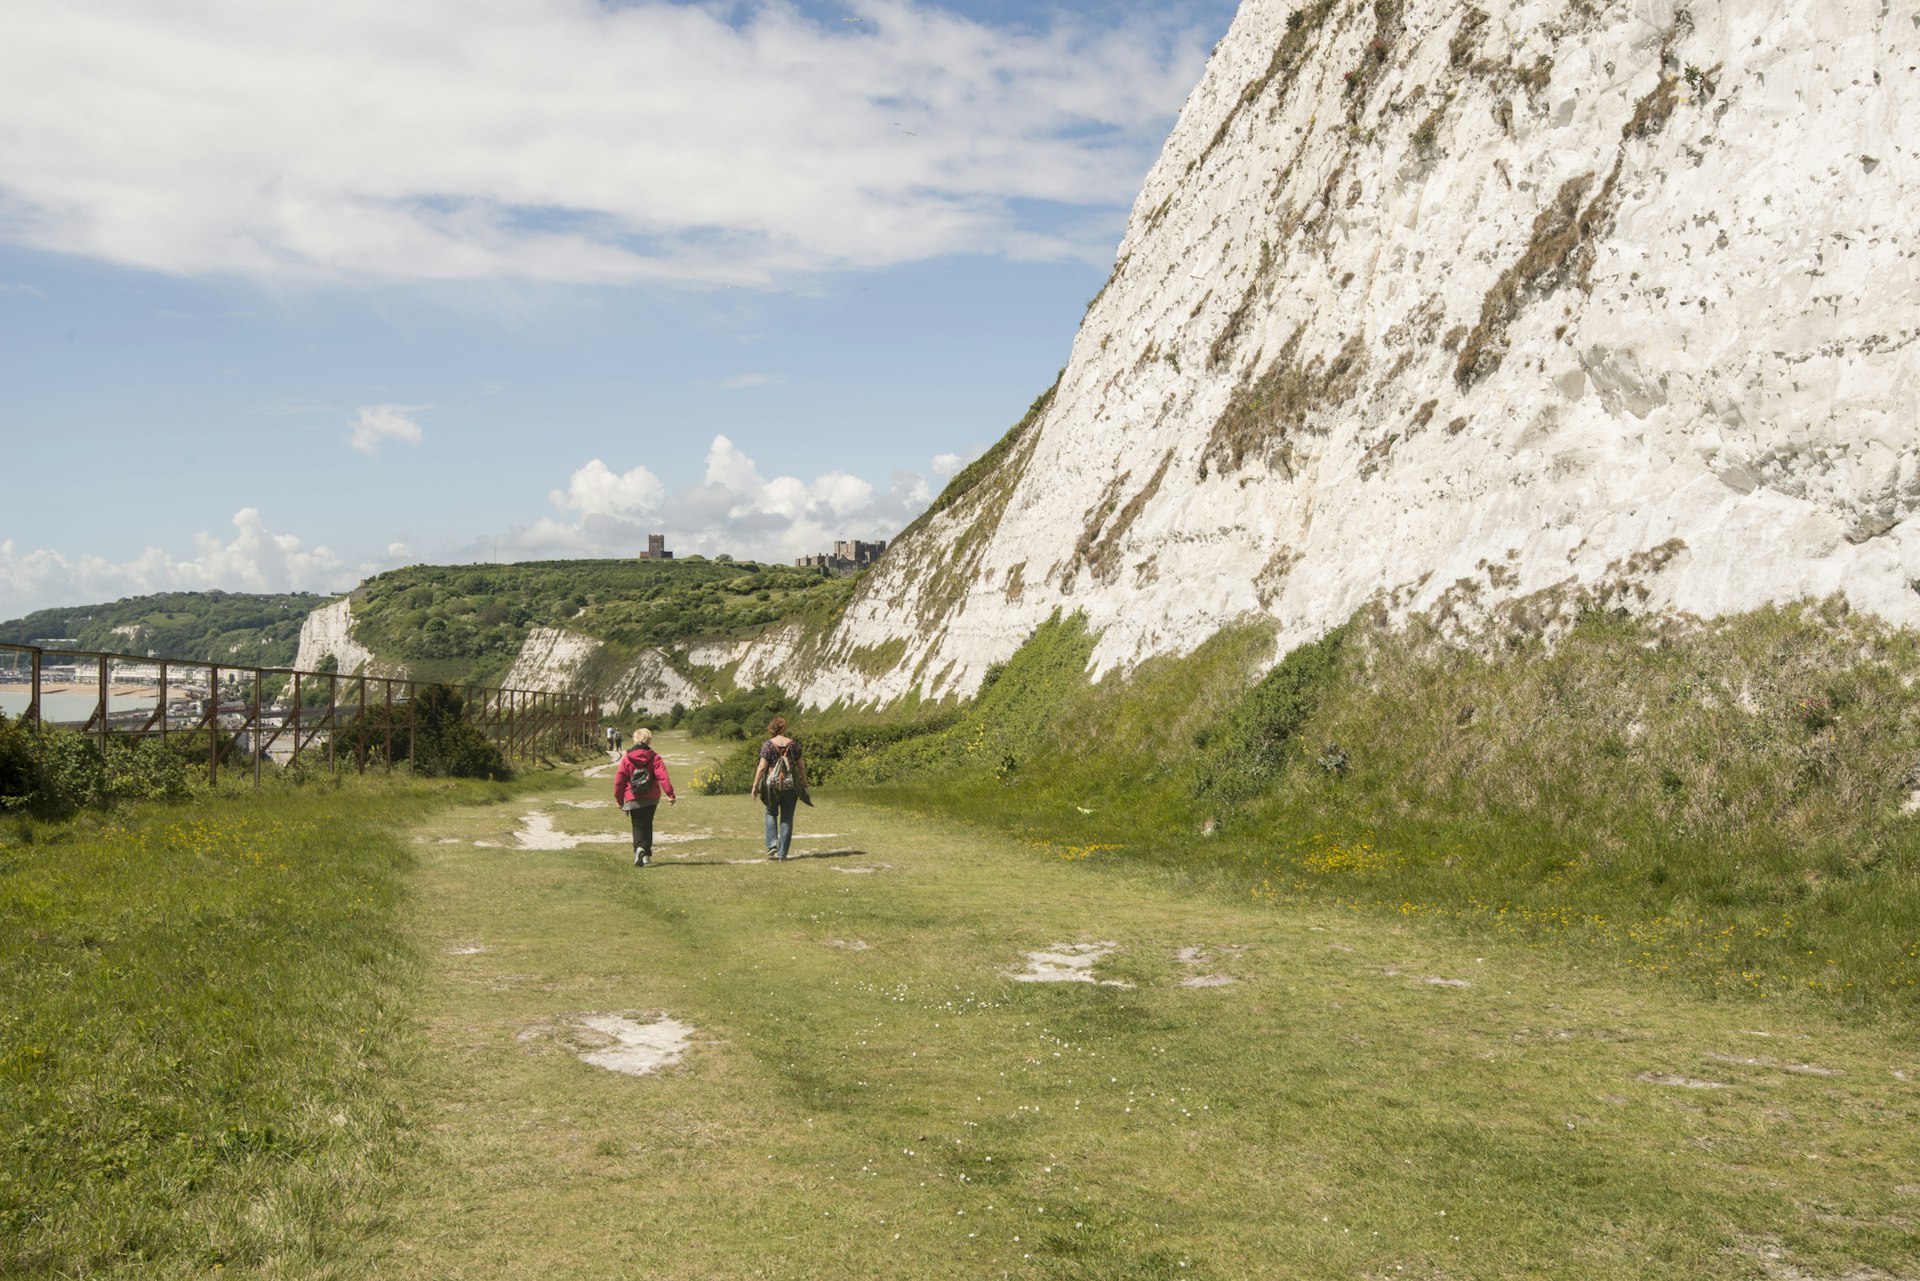 Two hikers walk on a path near the White Cliffs of Dover with a large castle on the clifftop in the distance